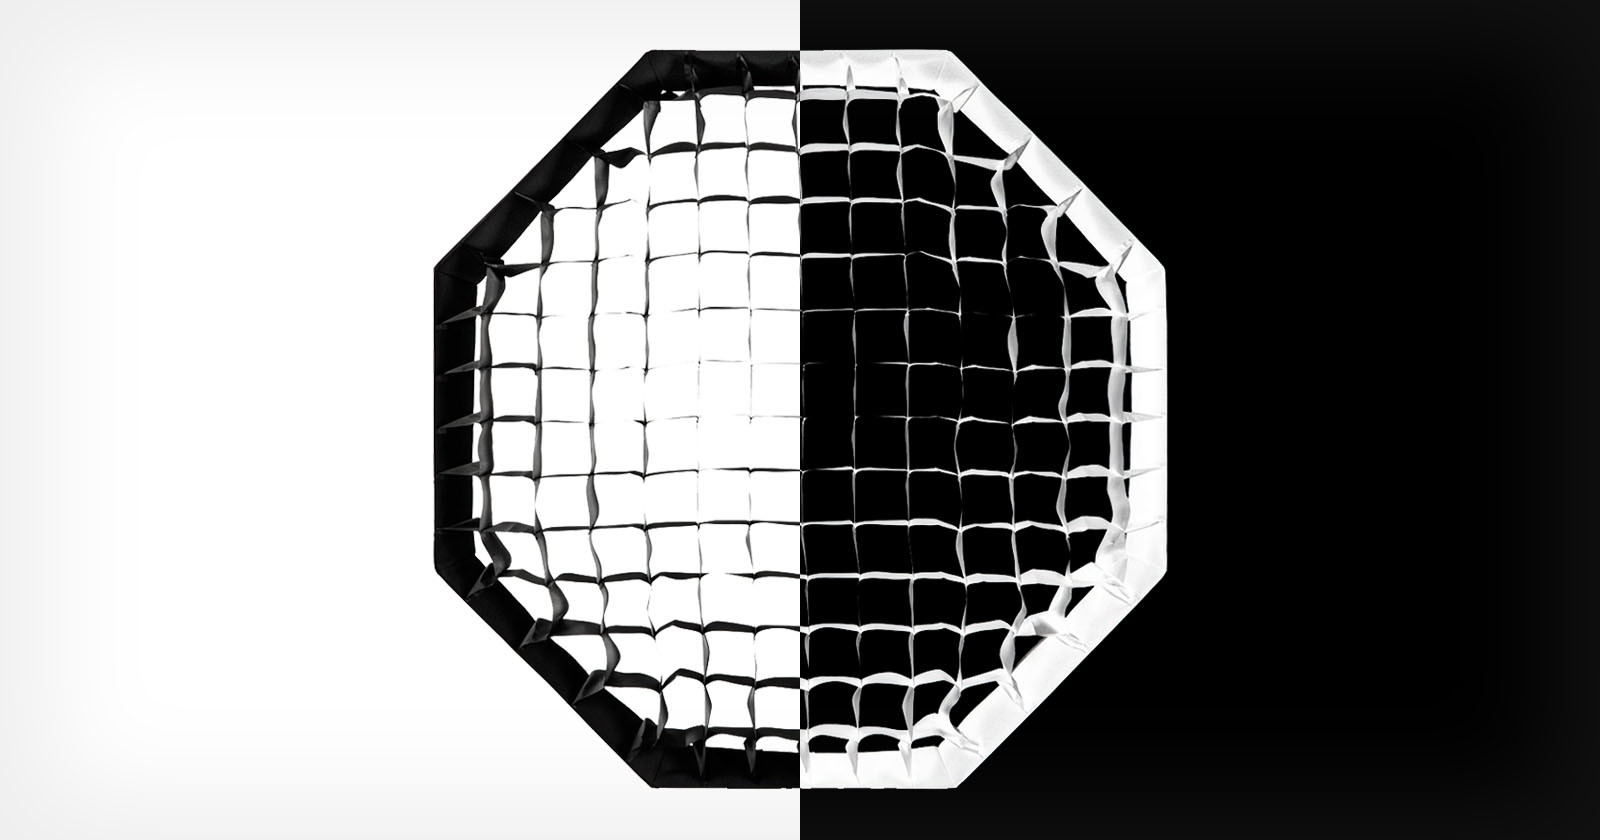  grids not directly increase contrast photos 